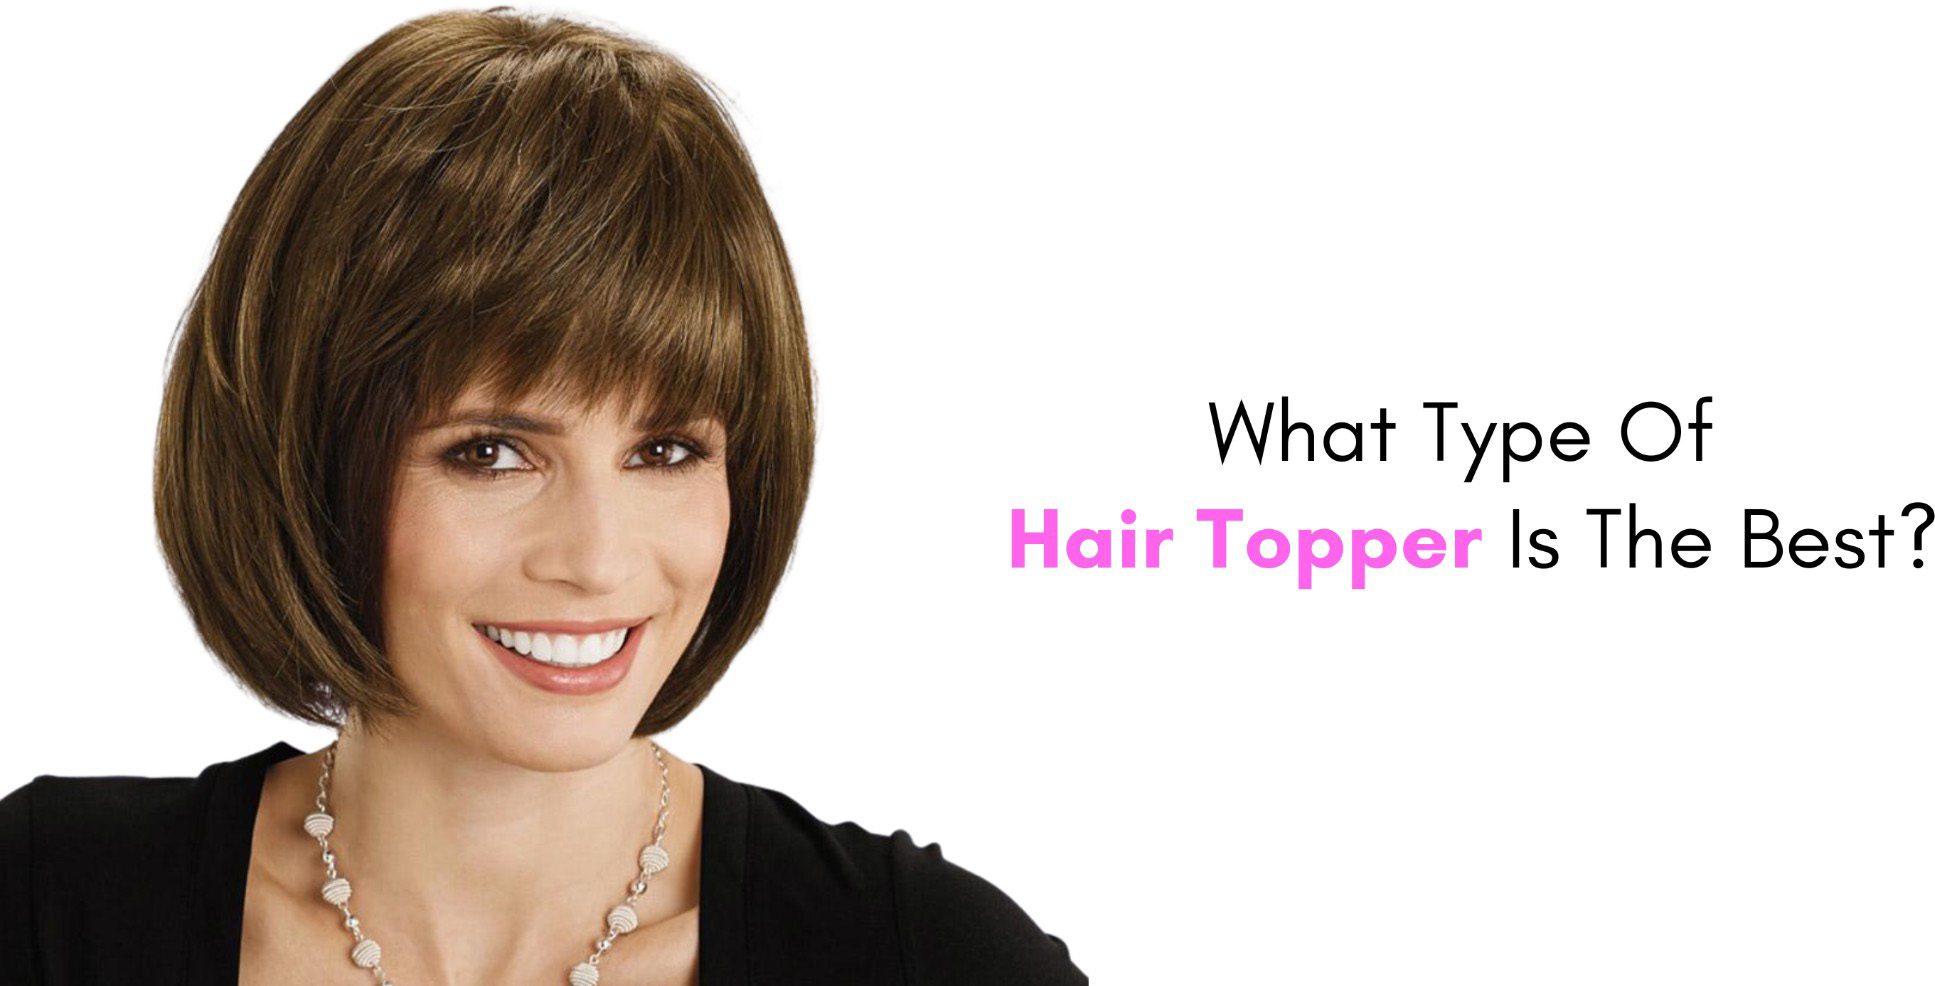 What Type Of Hair Topper Is The Best?